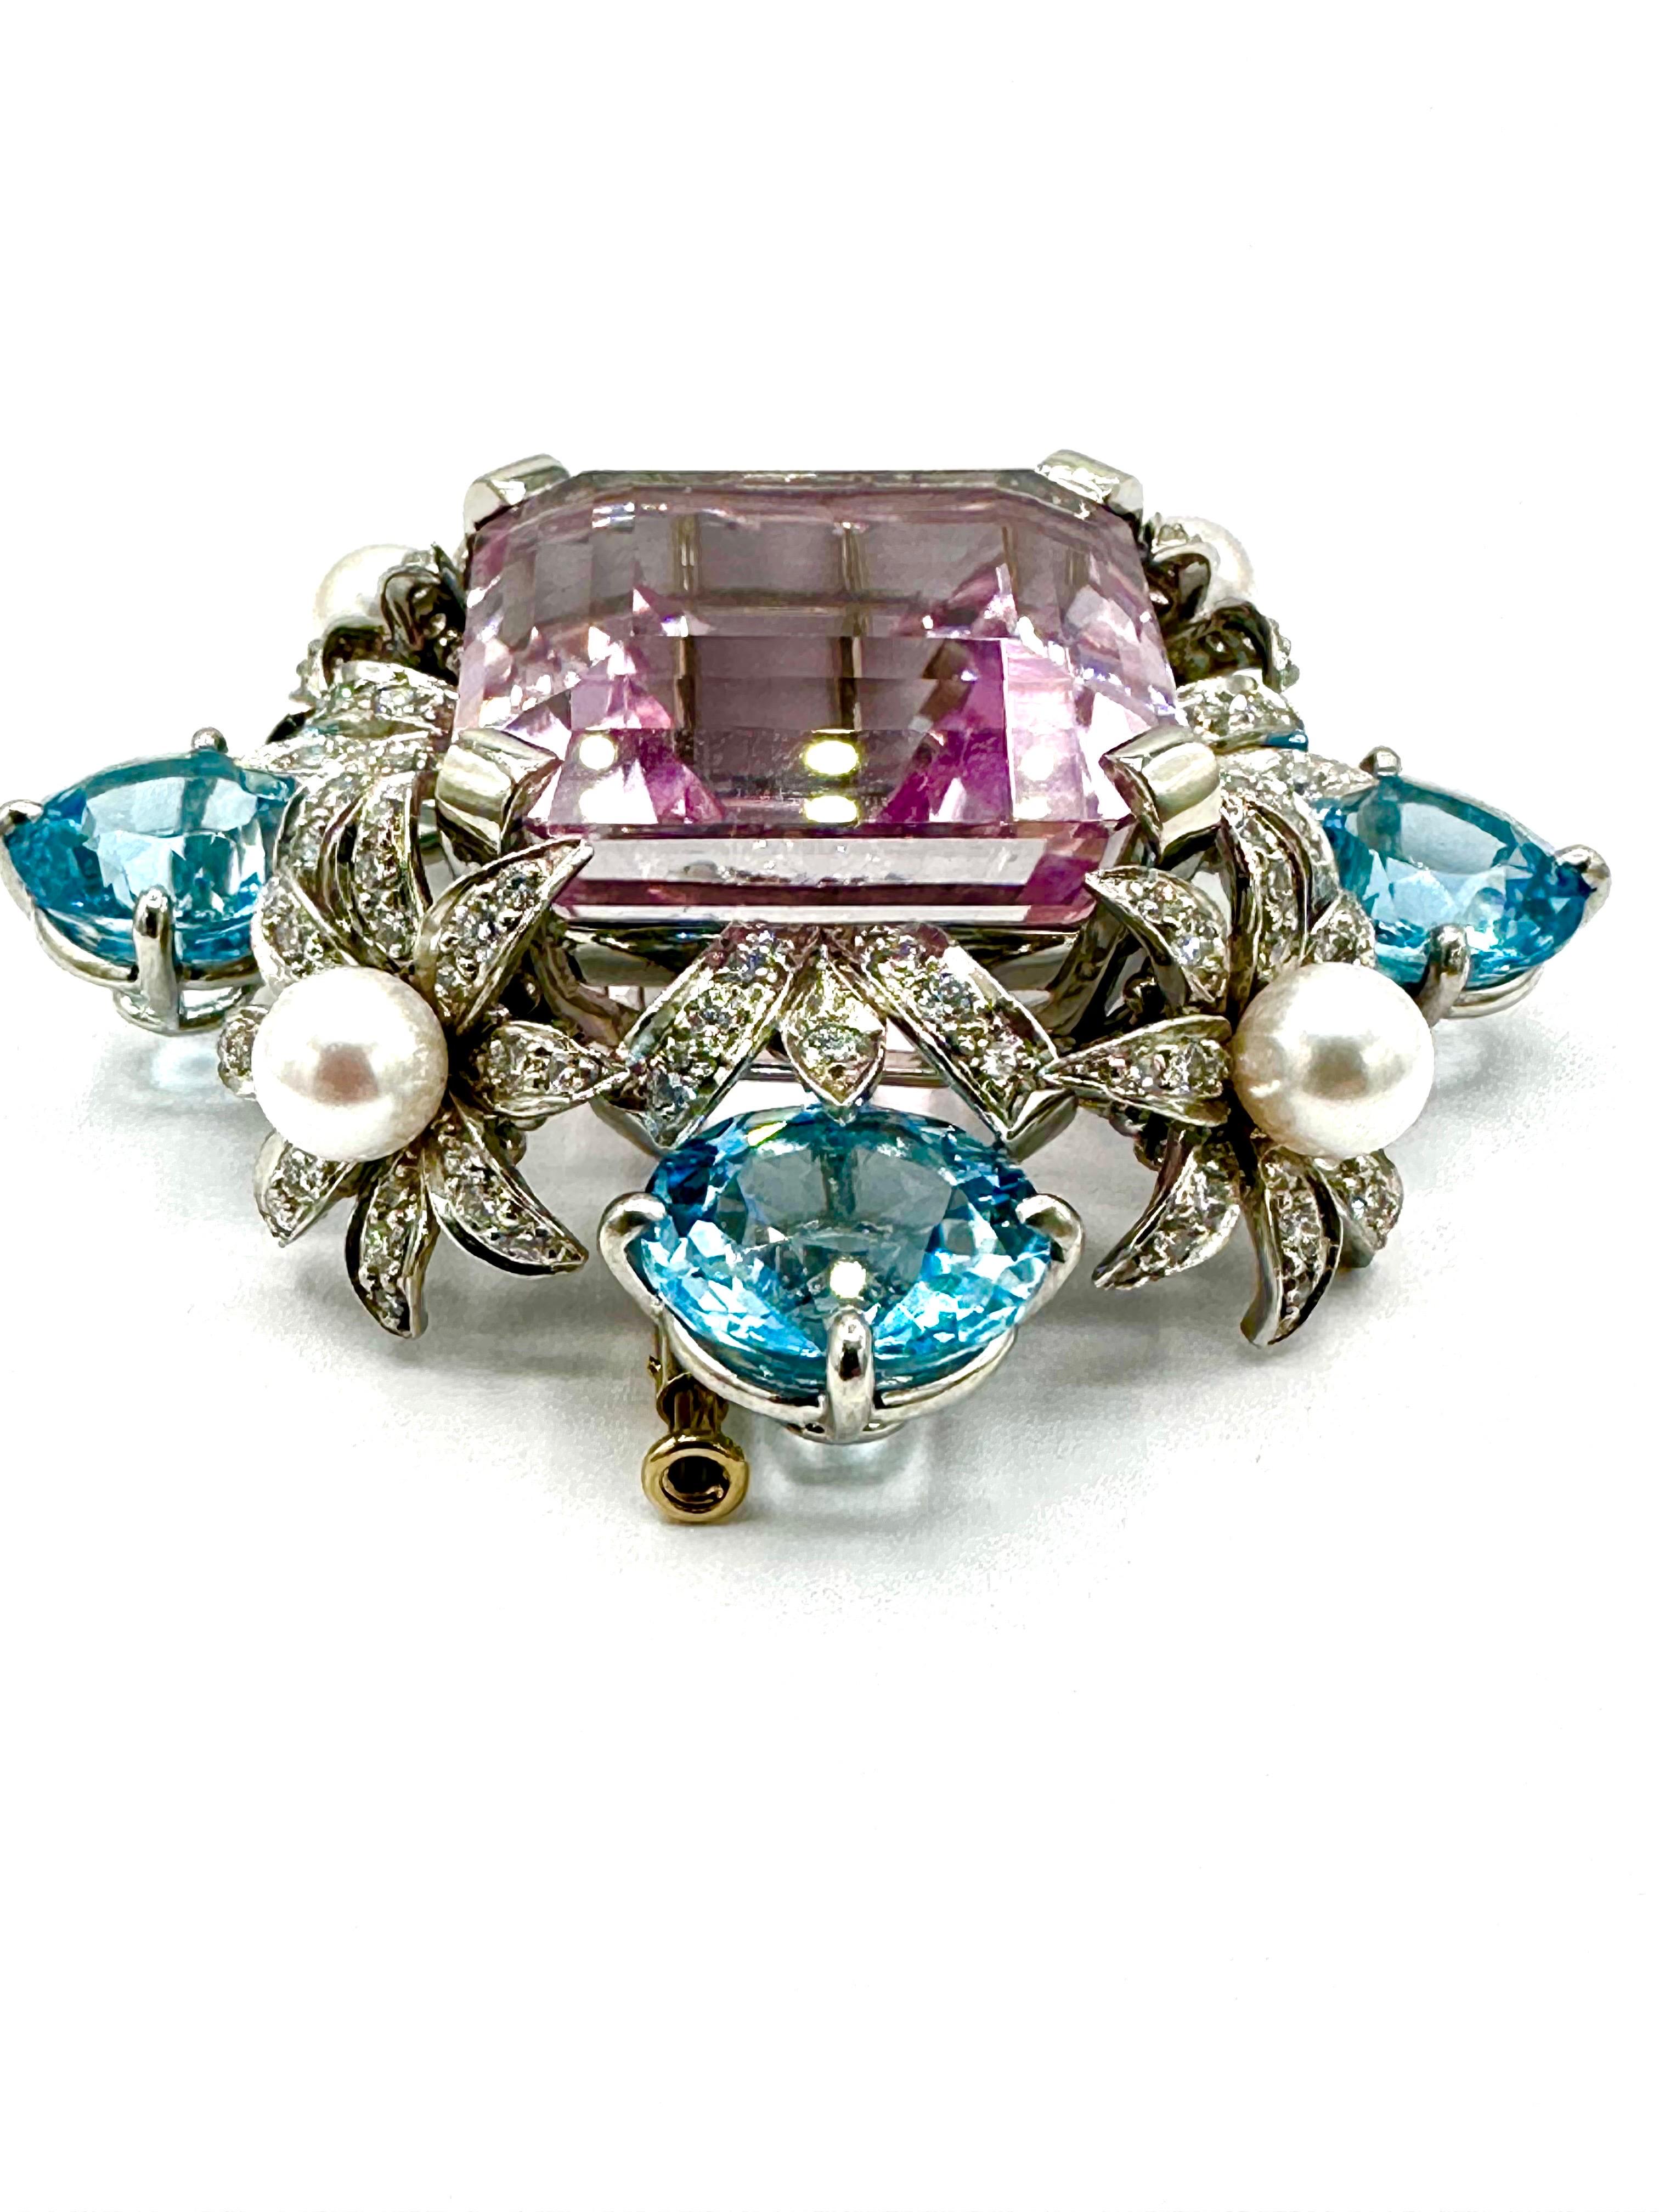 Bielka 60.00 Carat Kunzite, Blue Topaz, Diamond & Pearl Platinum Brooch In Excellent Condition For Sale In Chevy Chase, MD